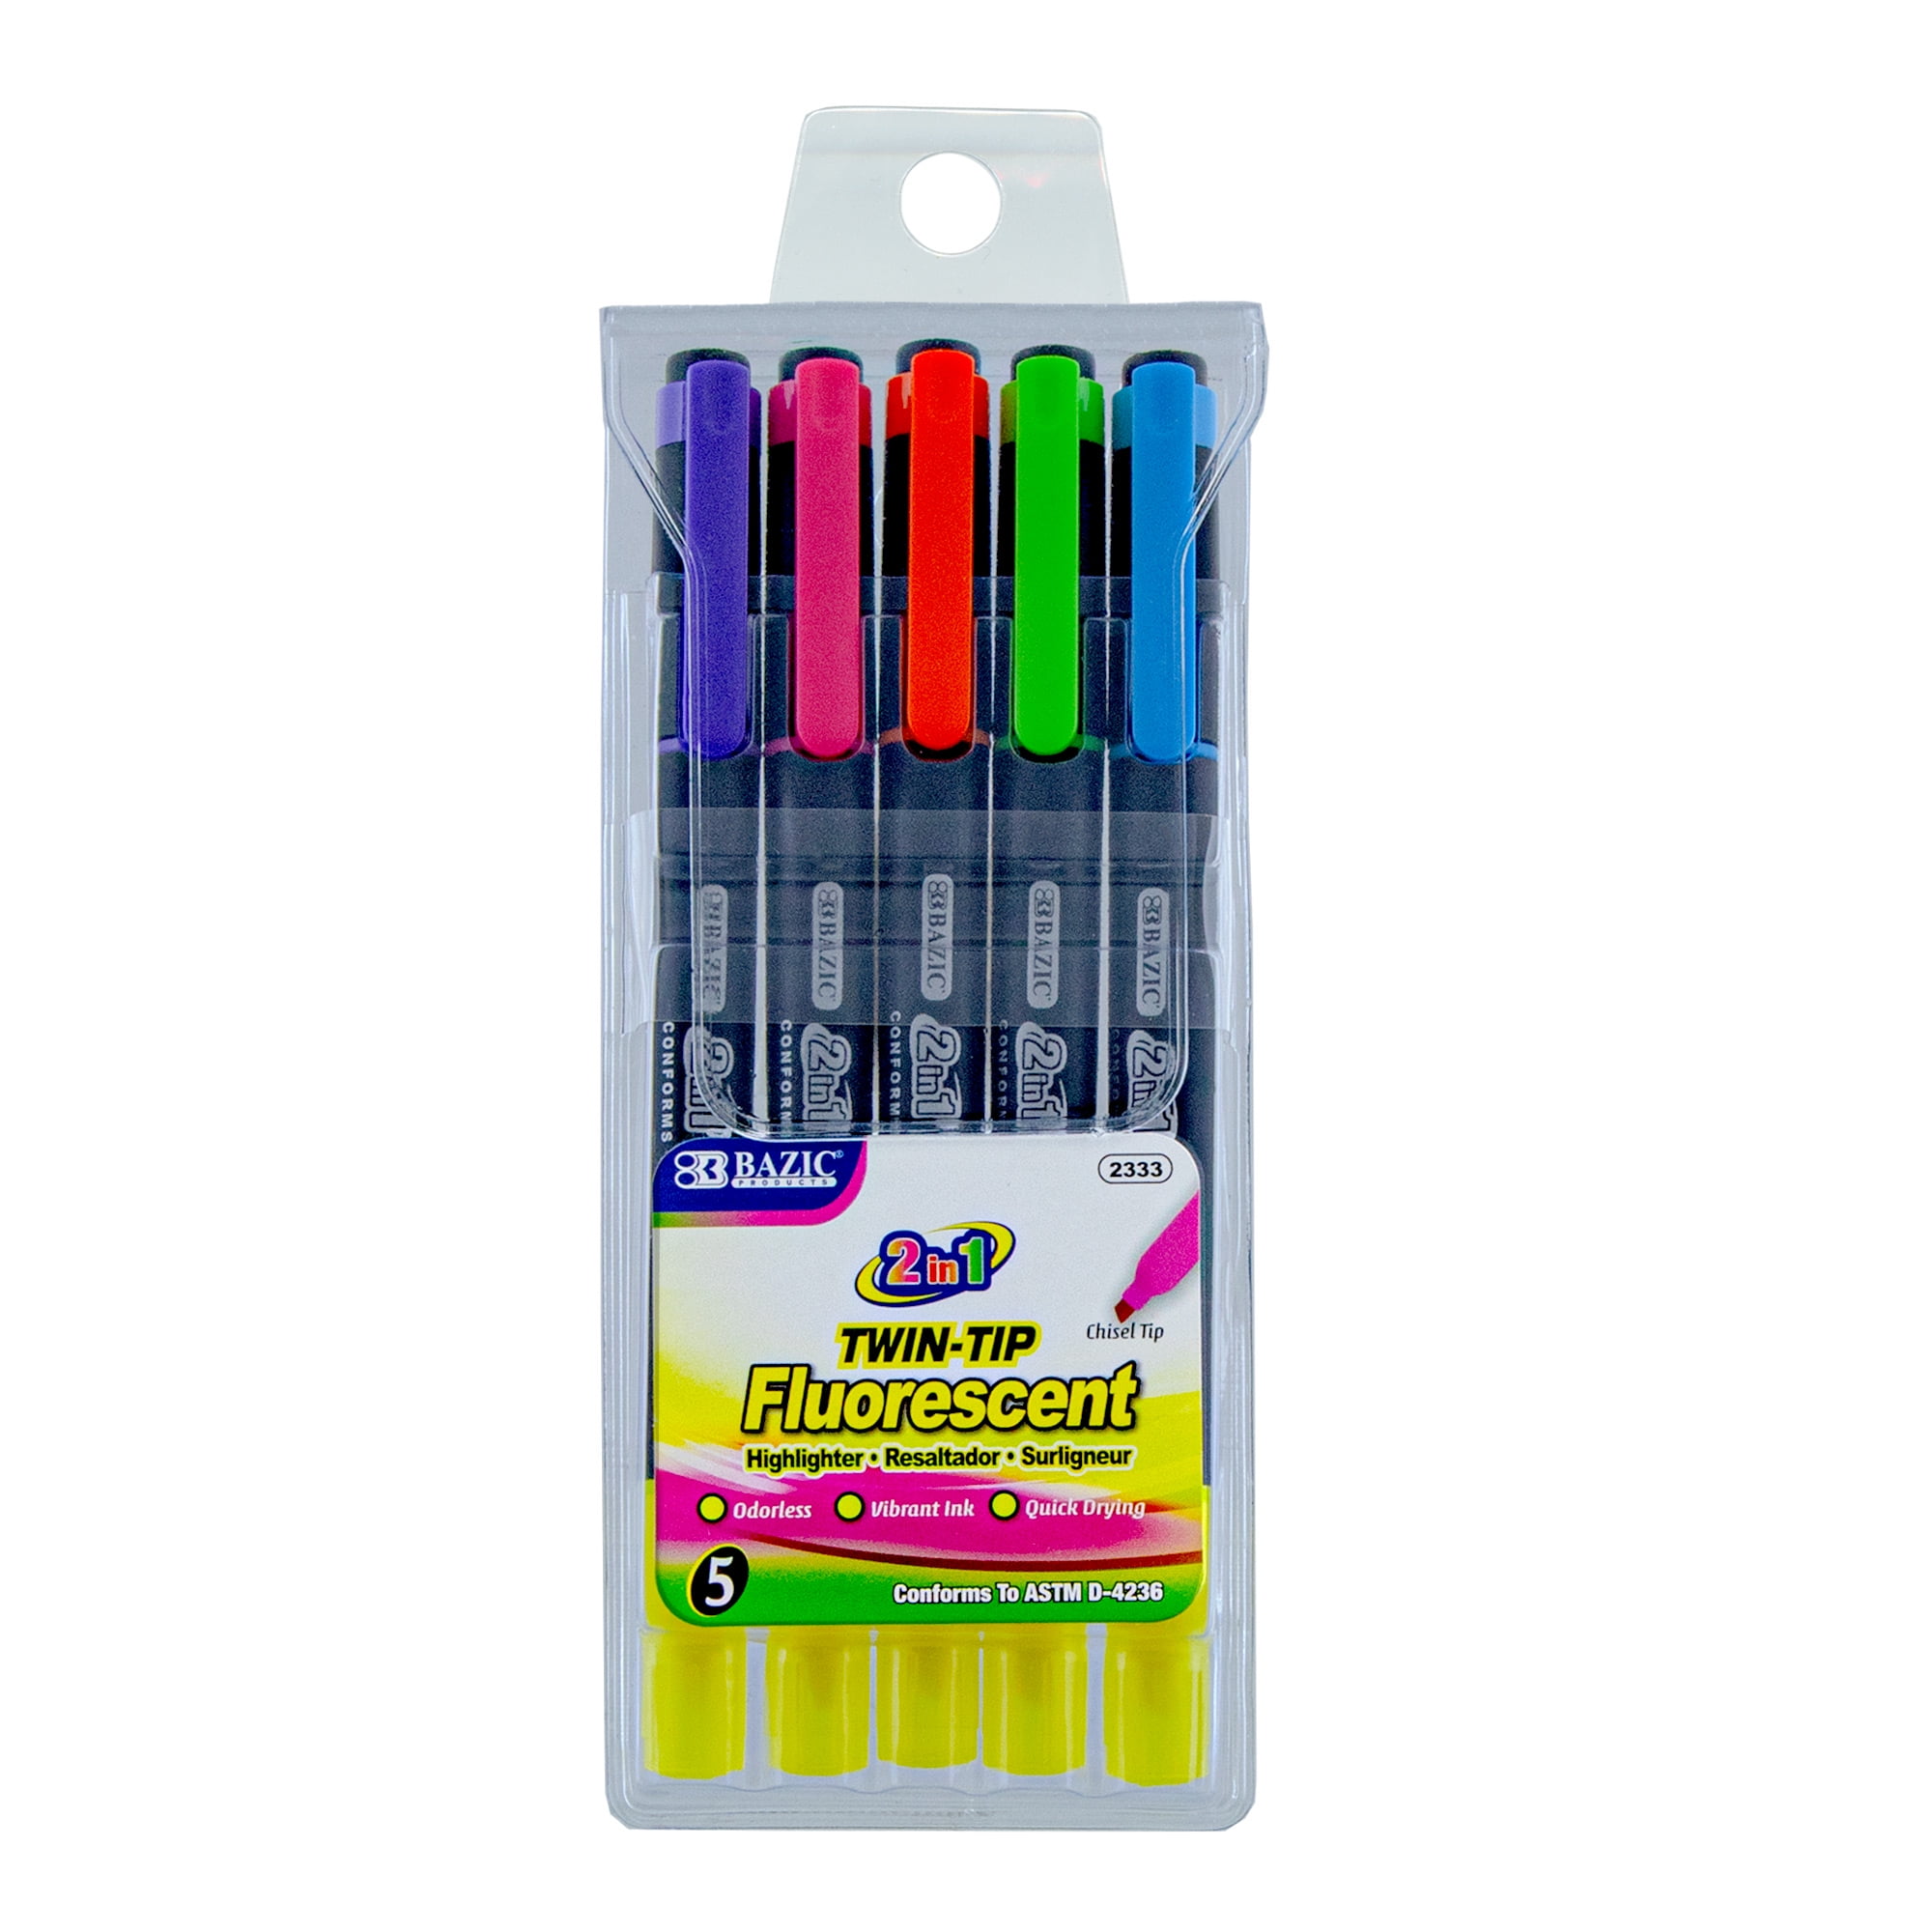 UPC 764608023334 product image for 2276211 BAZIC Highlighters - 5 Count  Assorted Fluorescent Colors  Pen Clip  Twi | upcitemdb.com